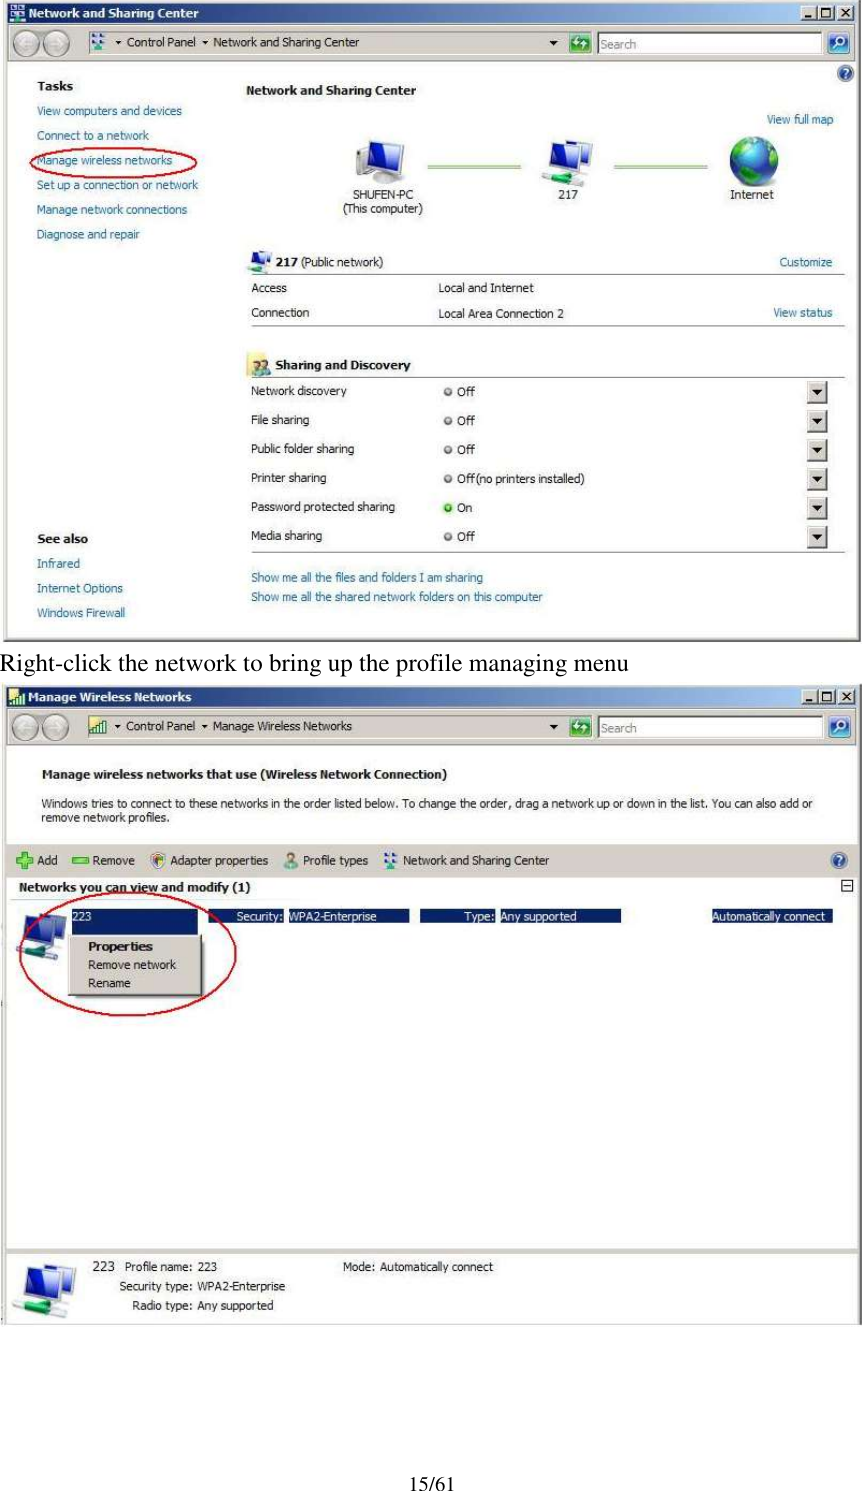 15/61Right-click the network to bring up the profile managing menu